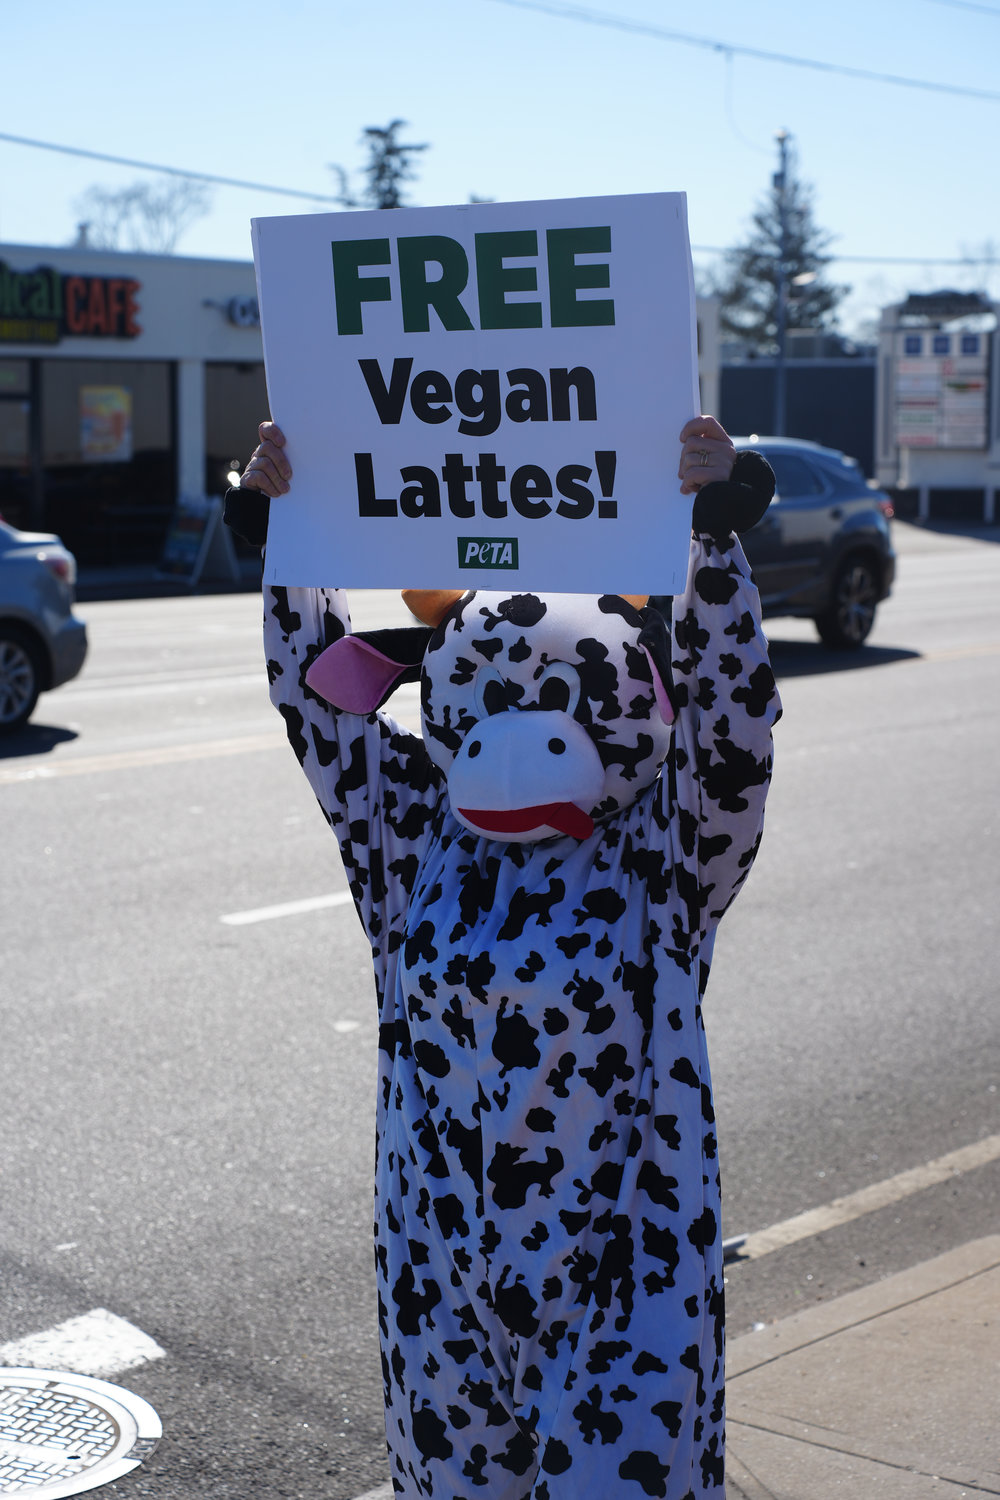 Juliana Di Leonardo dressed up as a cow as part of Humane Long Island’s and PETA’s protest against Starbucks. Starbucks up charges customers for dairy alternatives, which both organizations say is unfair.